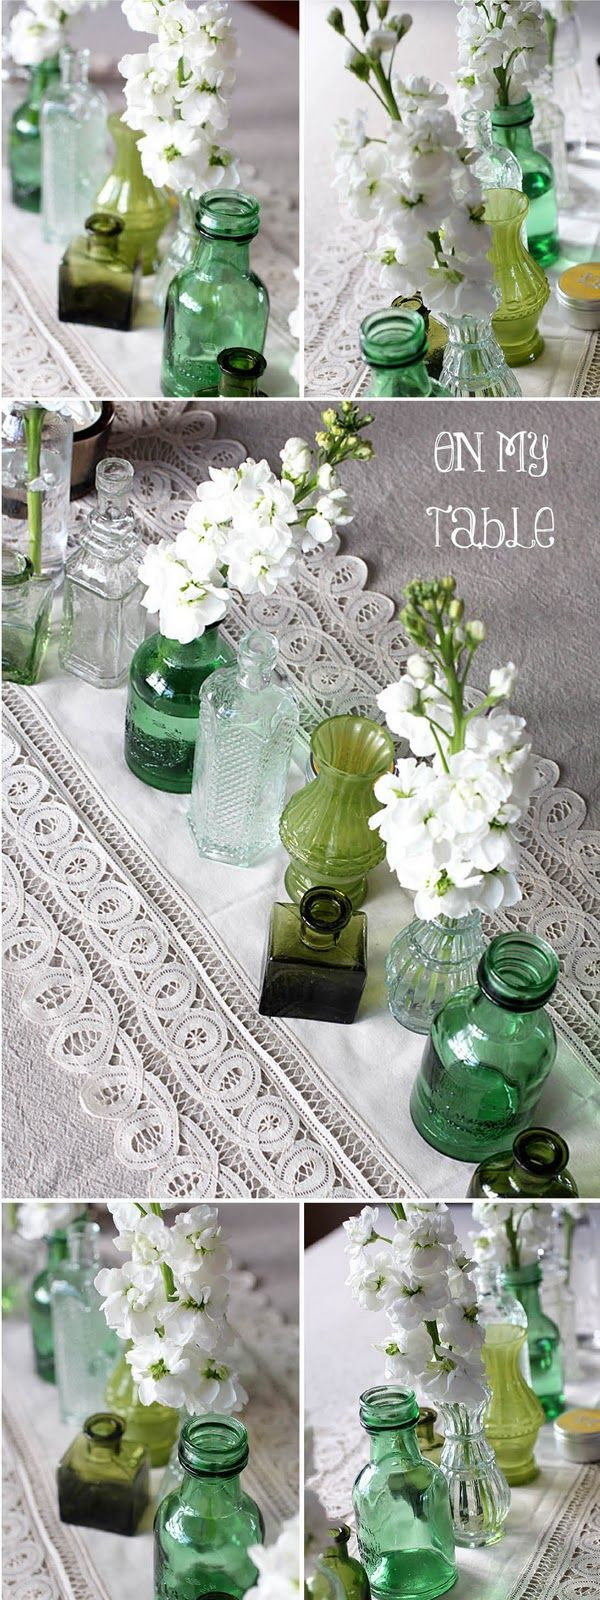 27 Stunning Family Dollar Flower Vases 2024 free download family dollar flower vases of 232 best wedding images on pinterest creative ideas decorating pertaining to different shades of green glass with white flowers